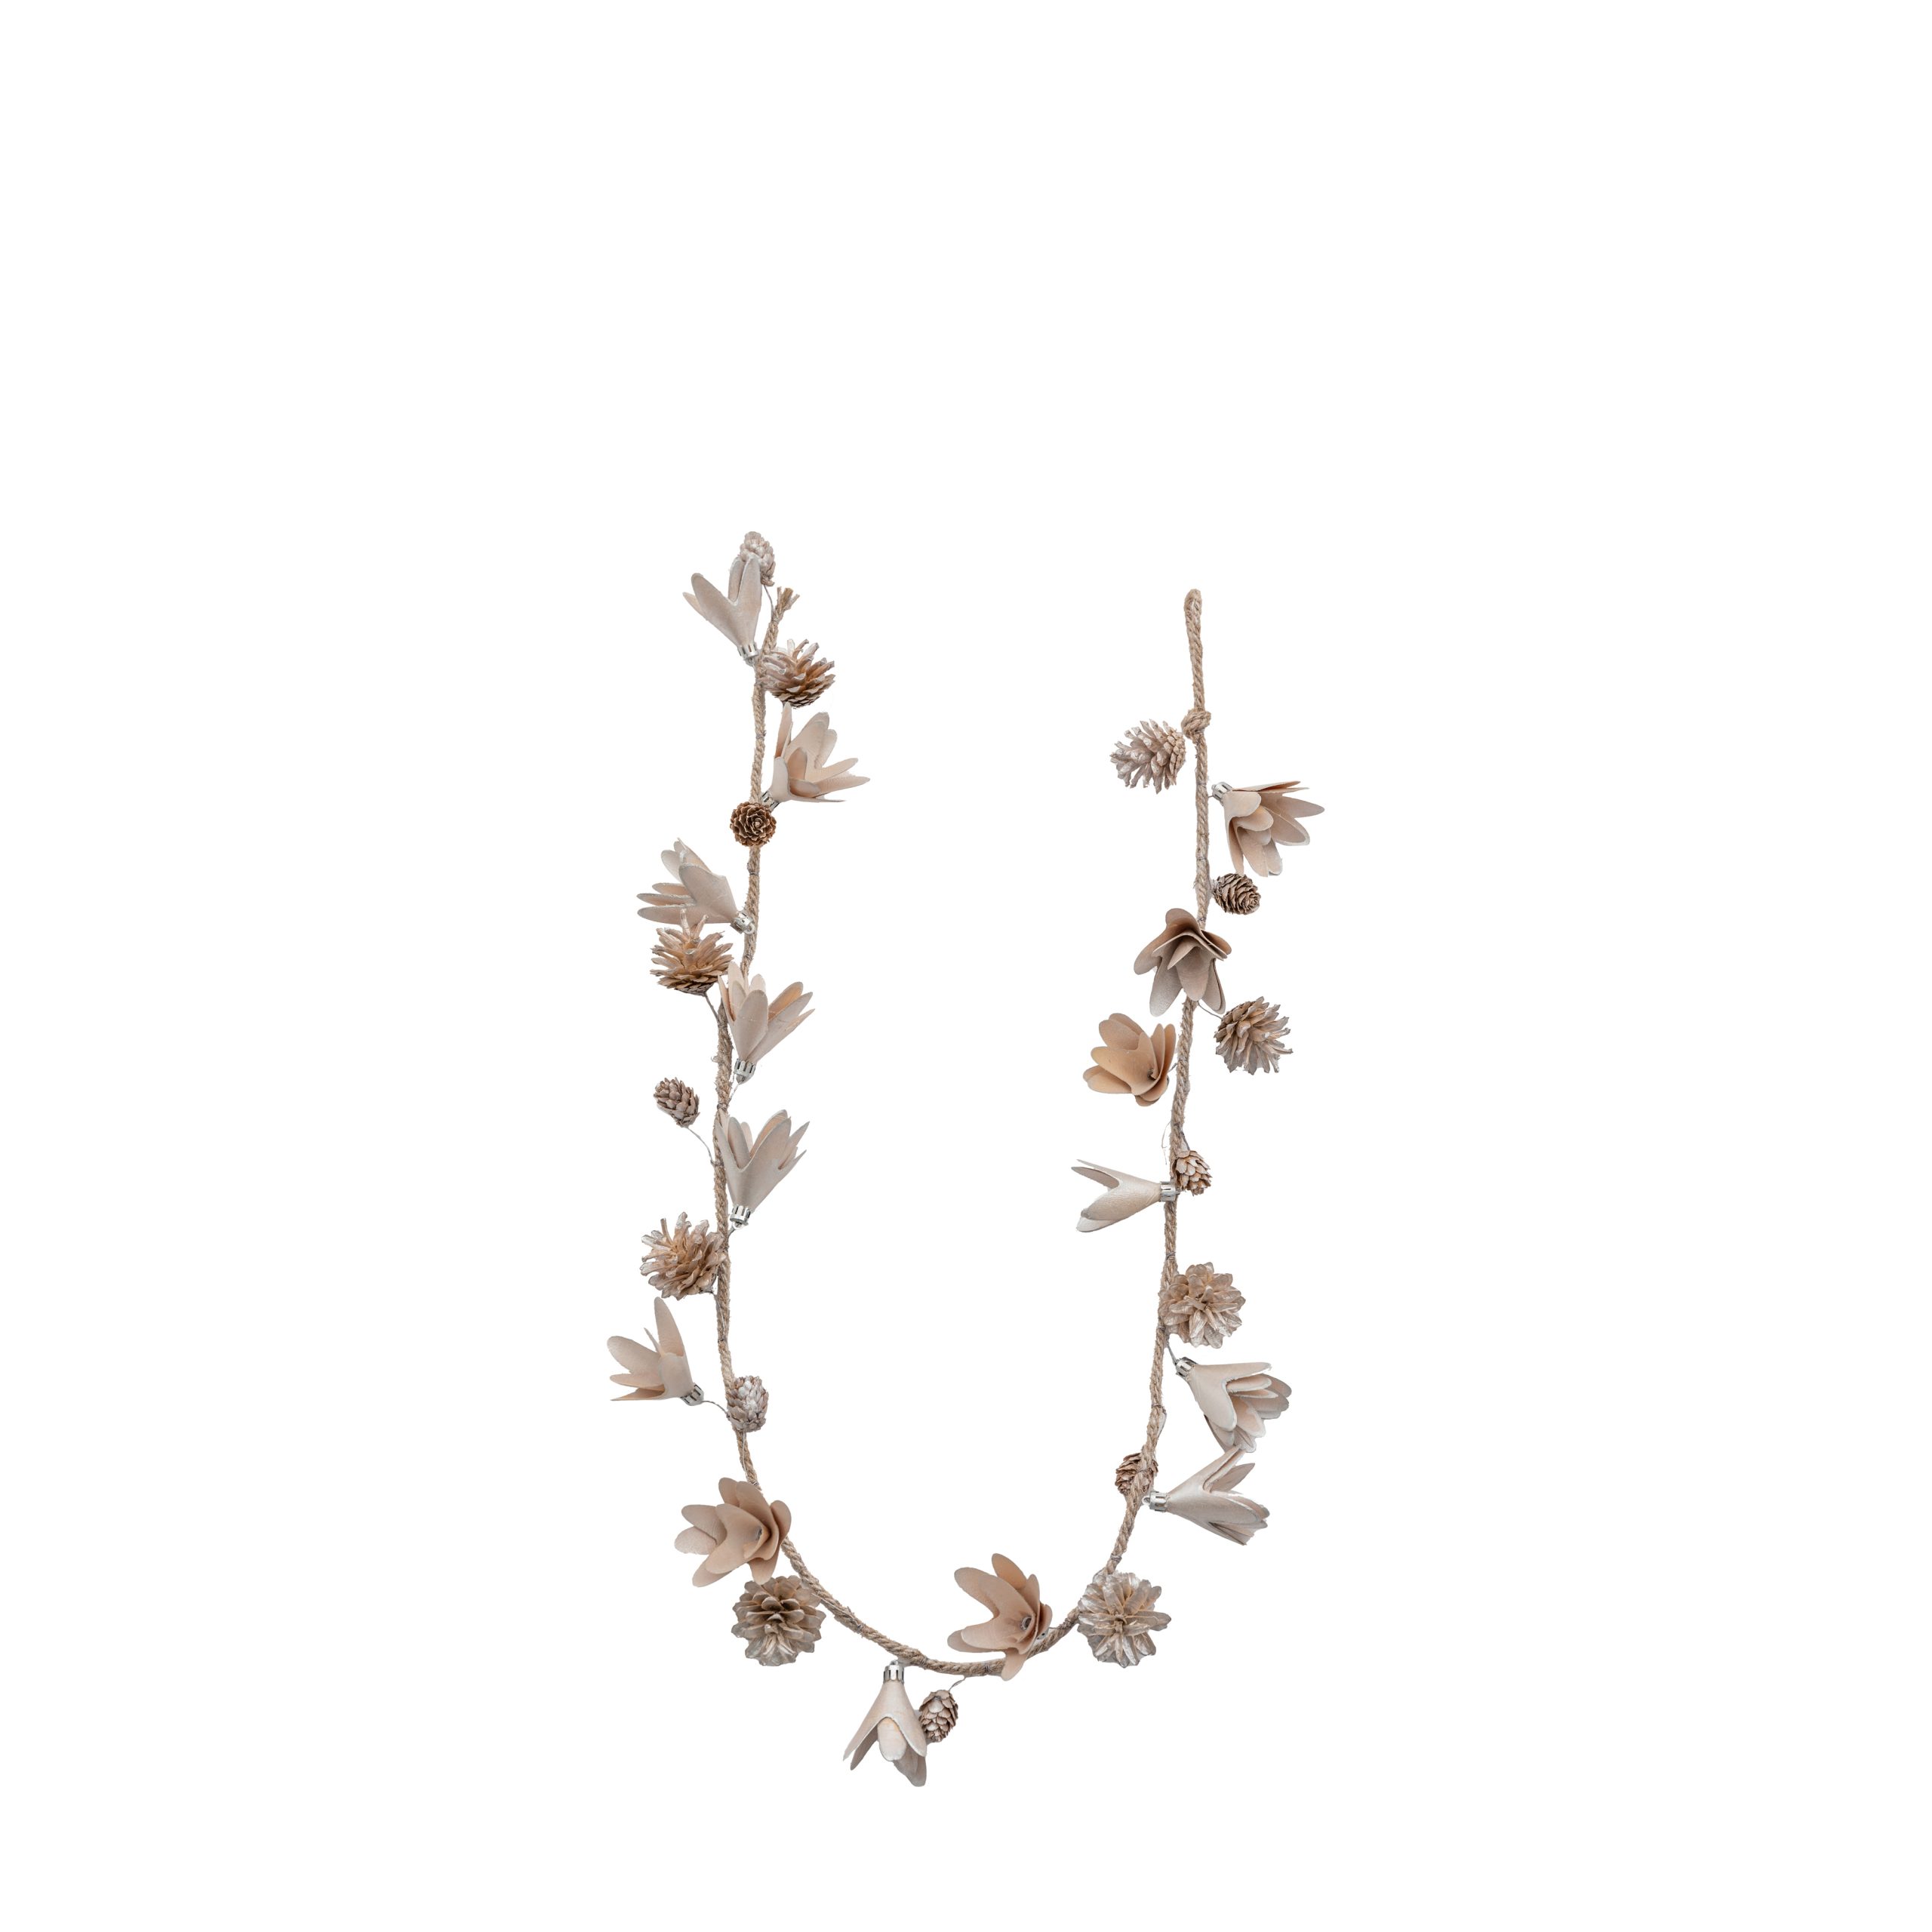 Gallery Direct Blush Cone & Floral Garland